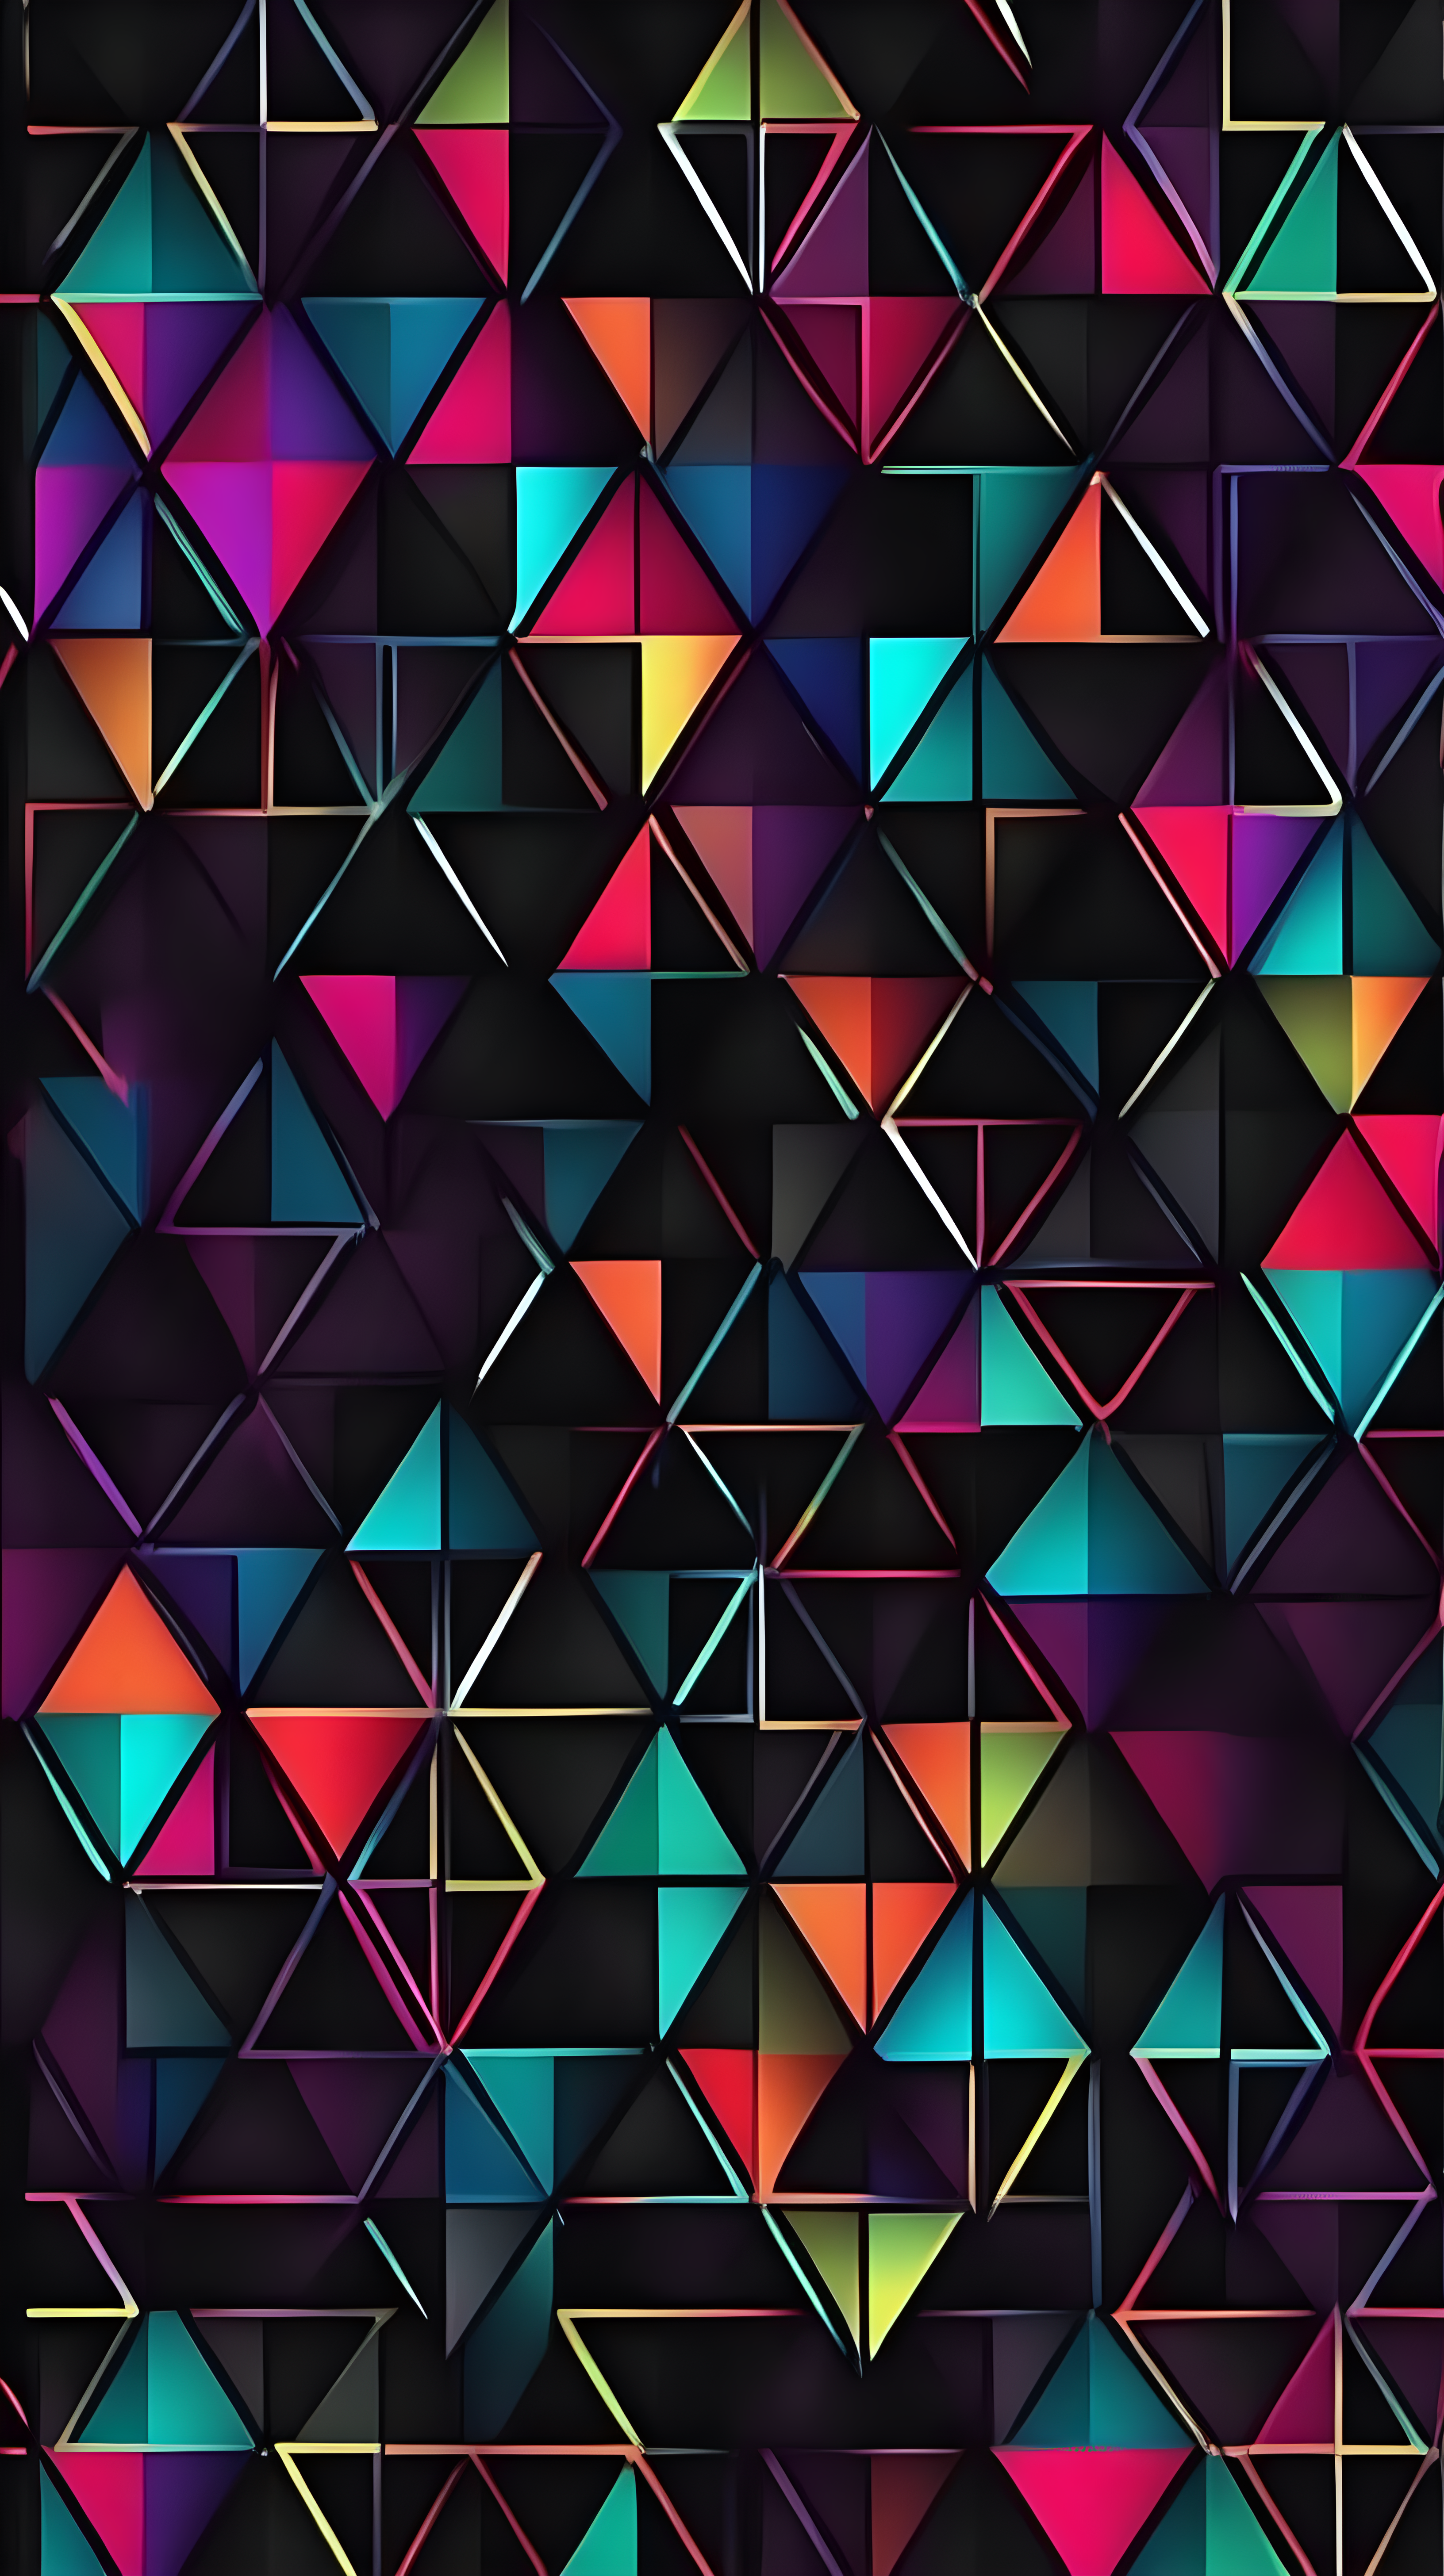 A dark but colorful wallpaper with a geometric